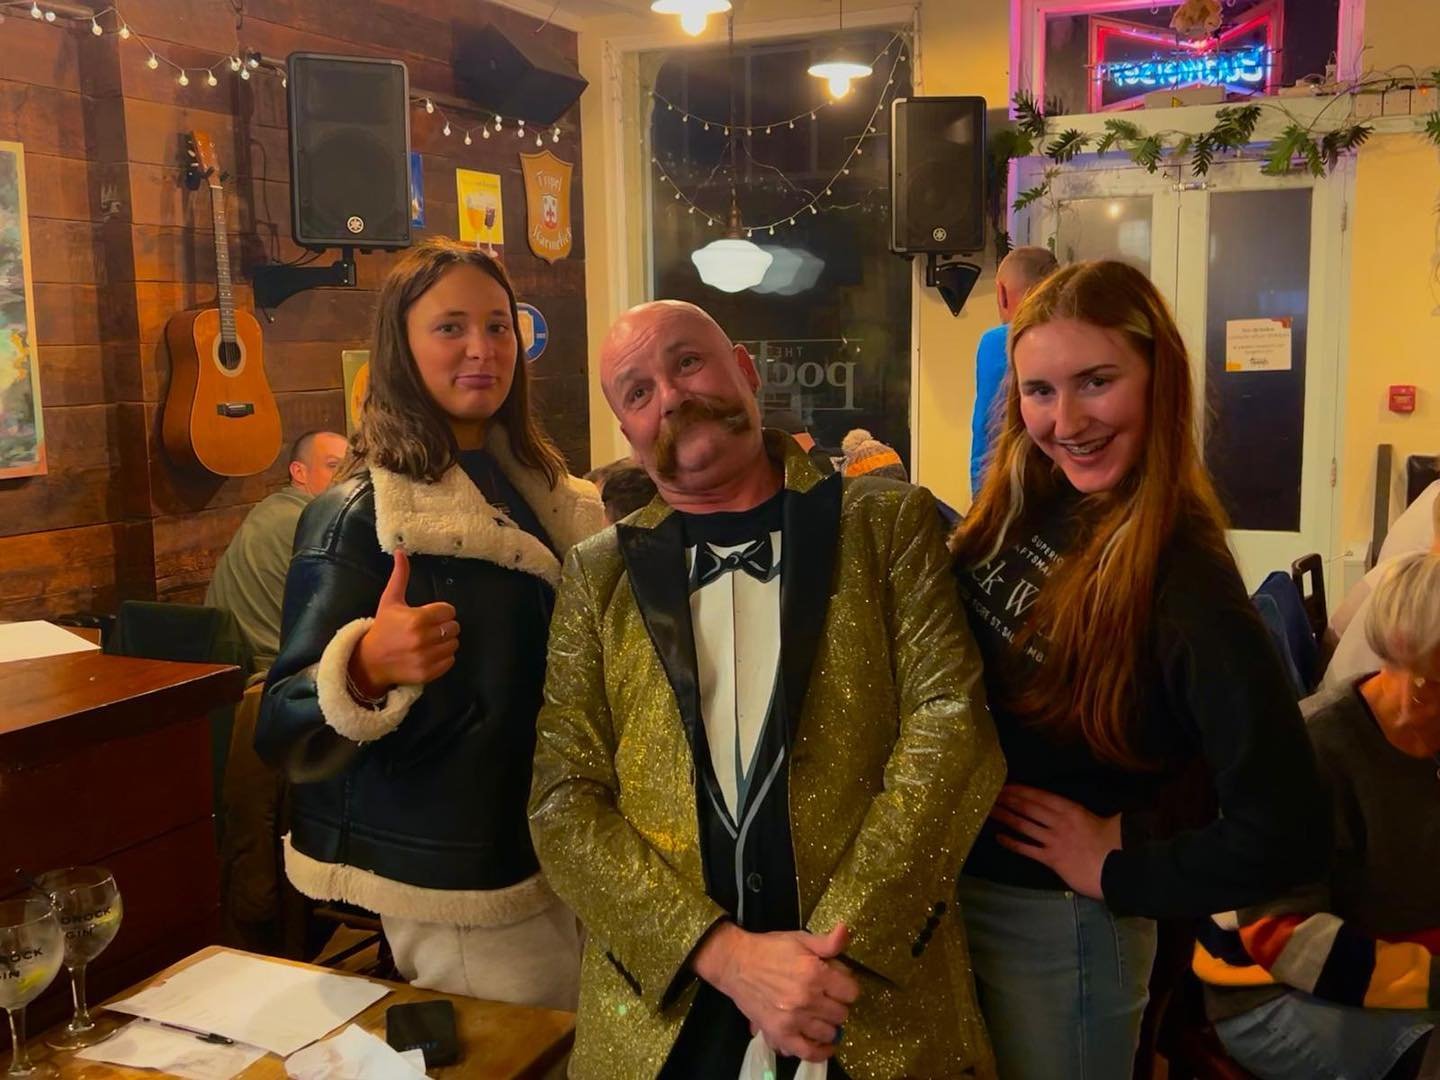 Quizmaster Stanley is back tonight providing our fortnightly quiz from 8:30pm!

The usual fun and games are in store this week, so get down soon and grab a table to get involved! 

Free entry 🥳